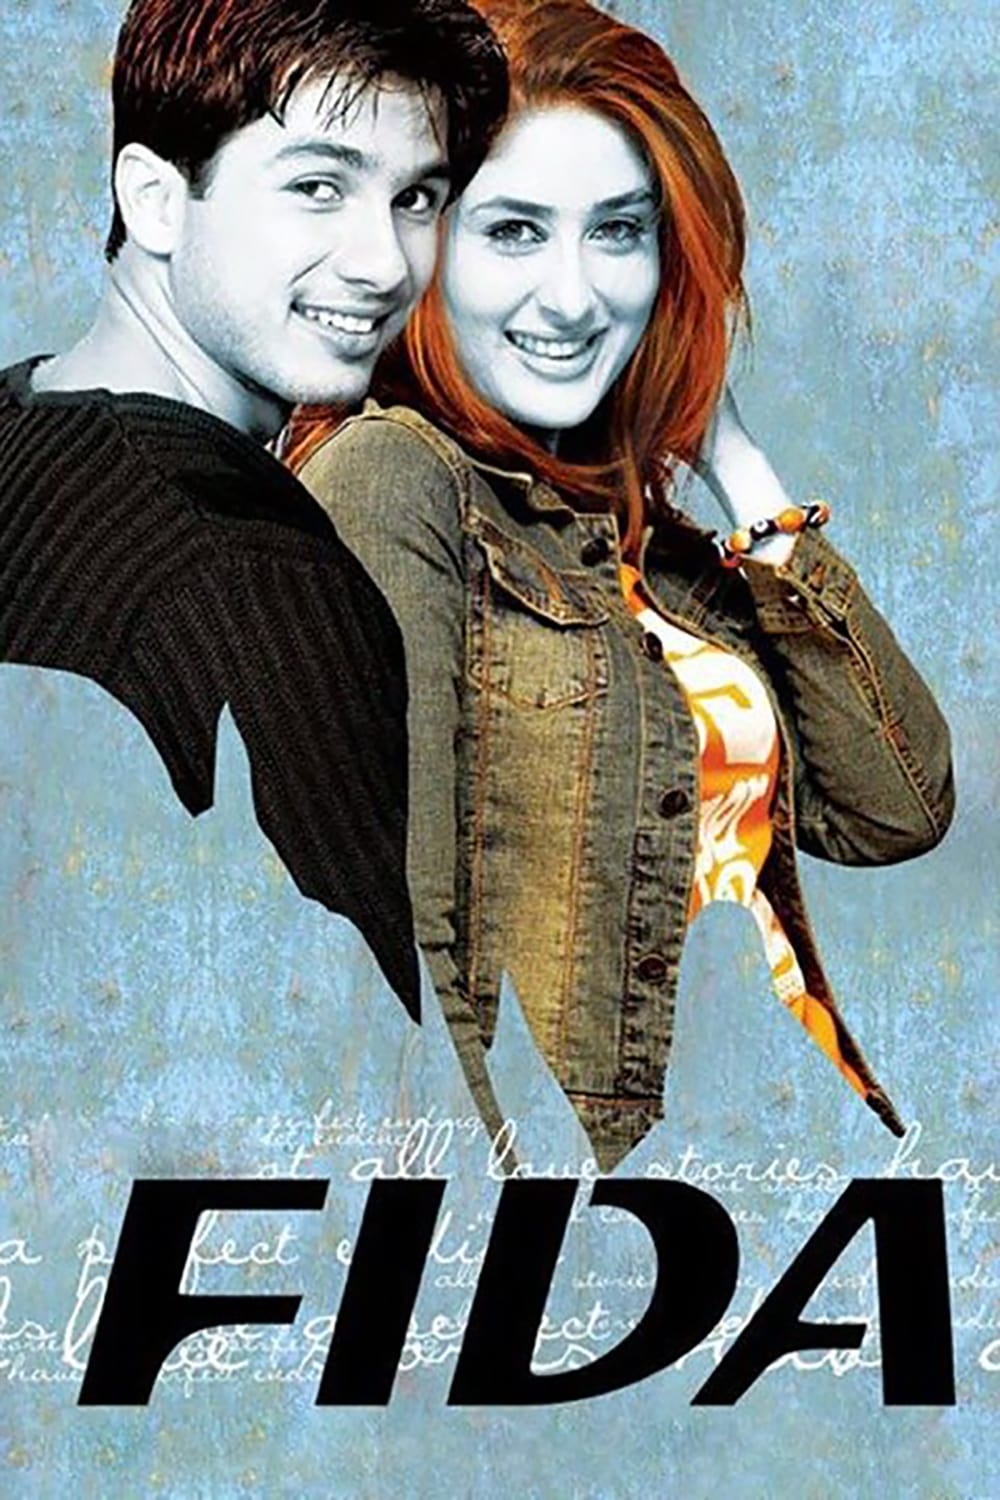 Poster for the movie "Fida"